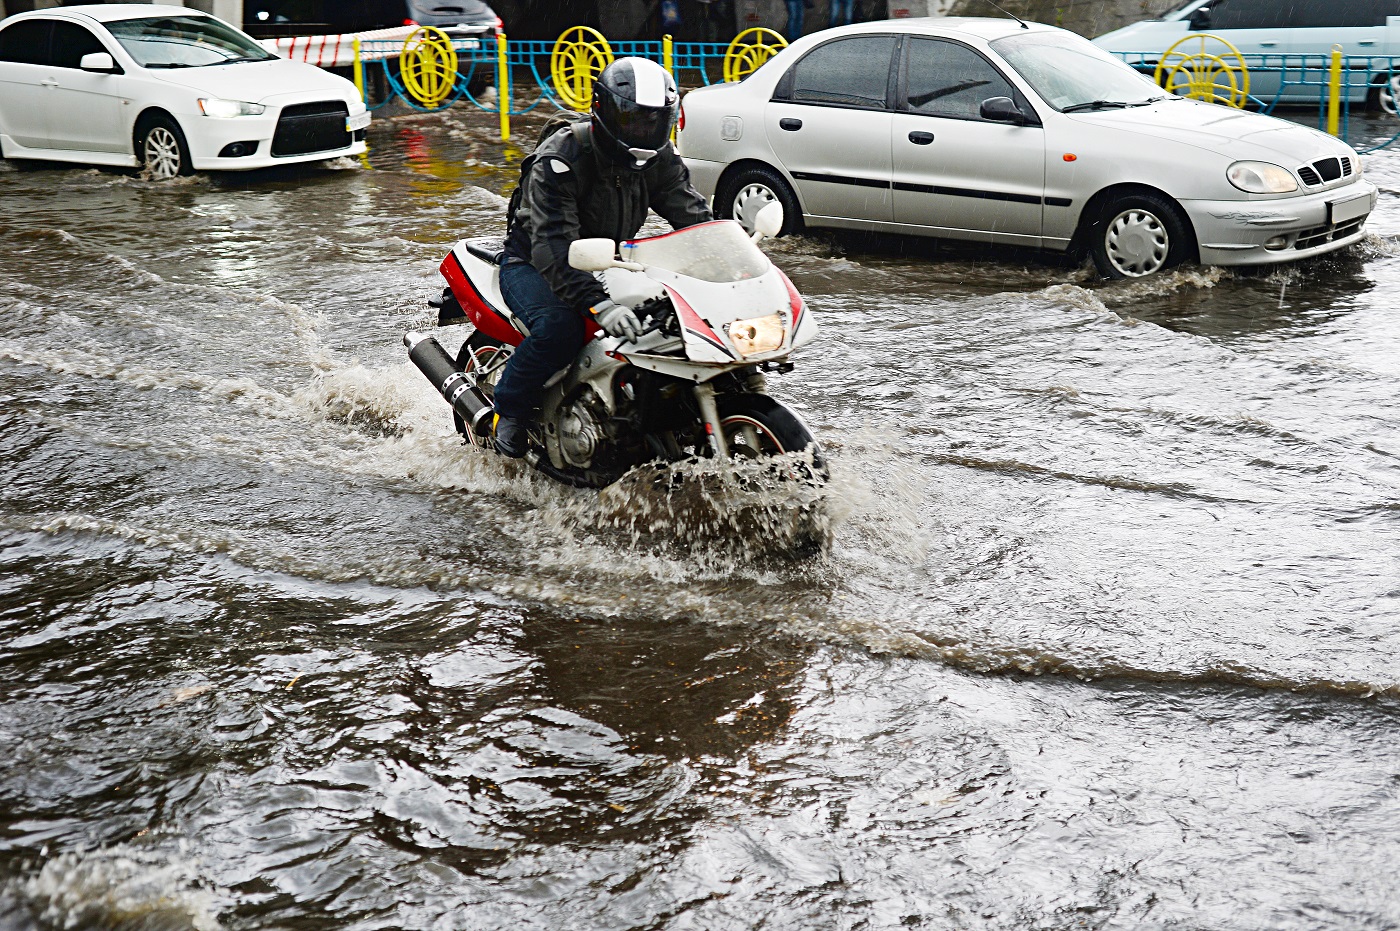 Motorcycle and cars on flooded road during the heavy rain